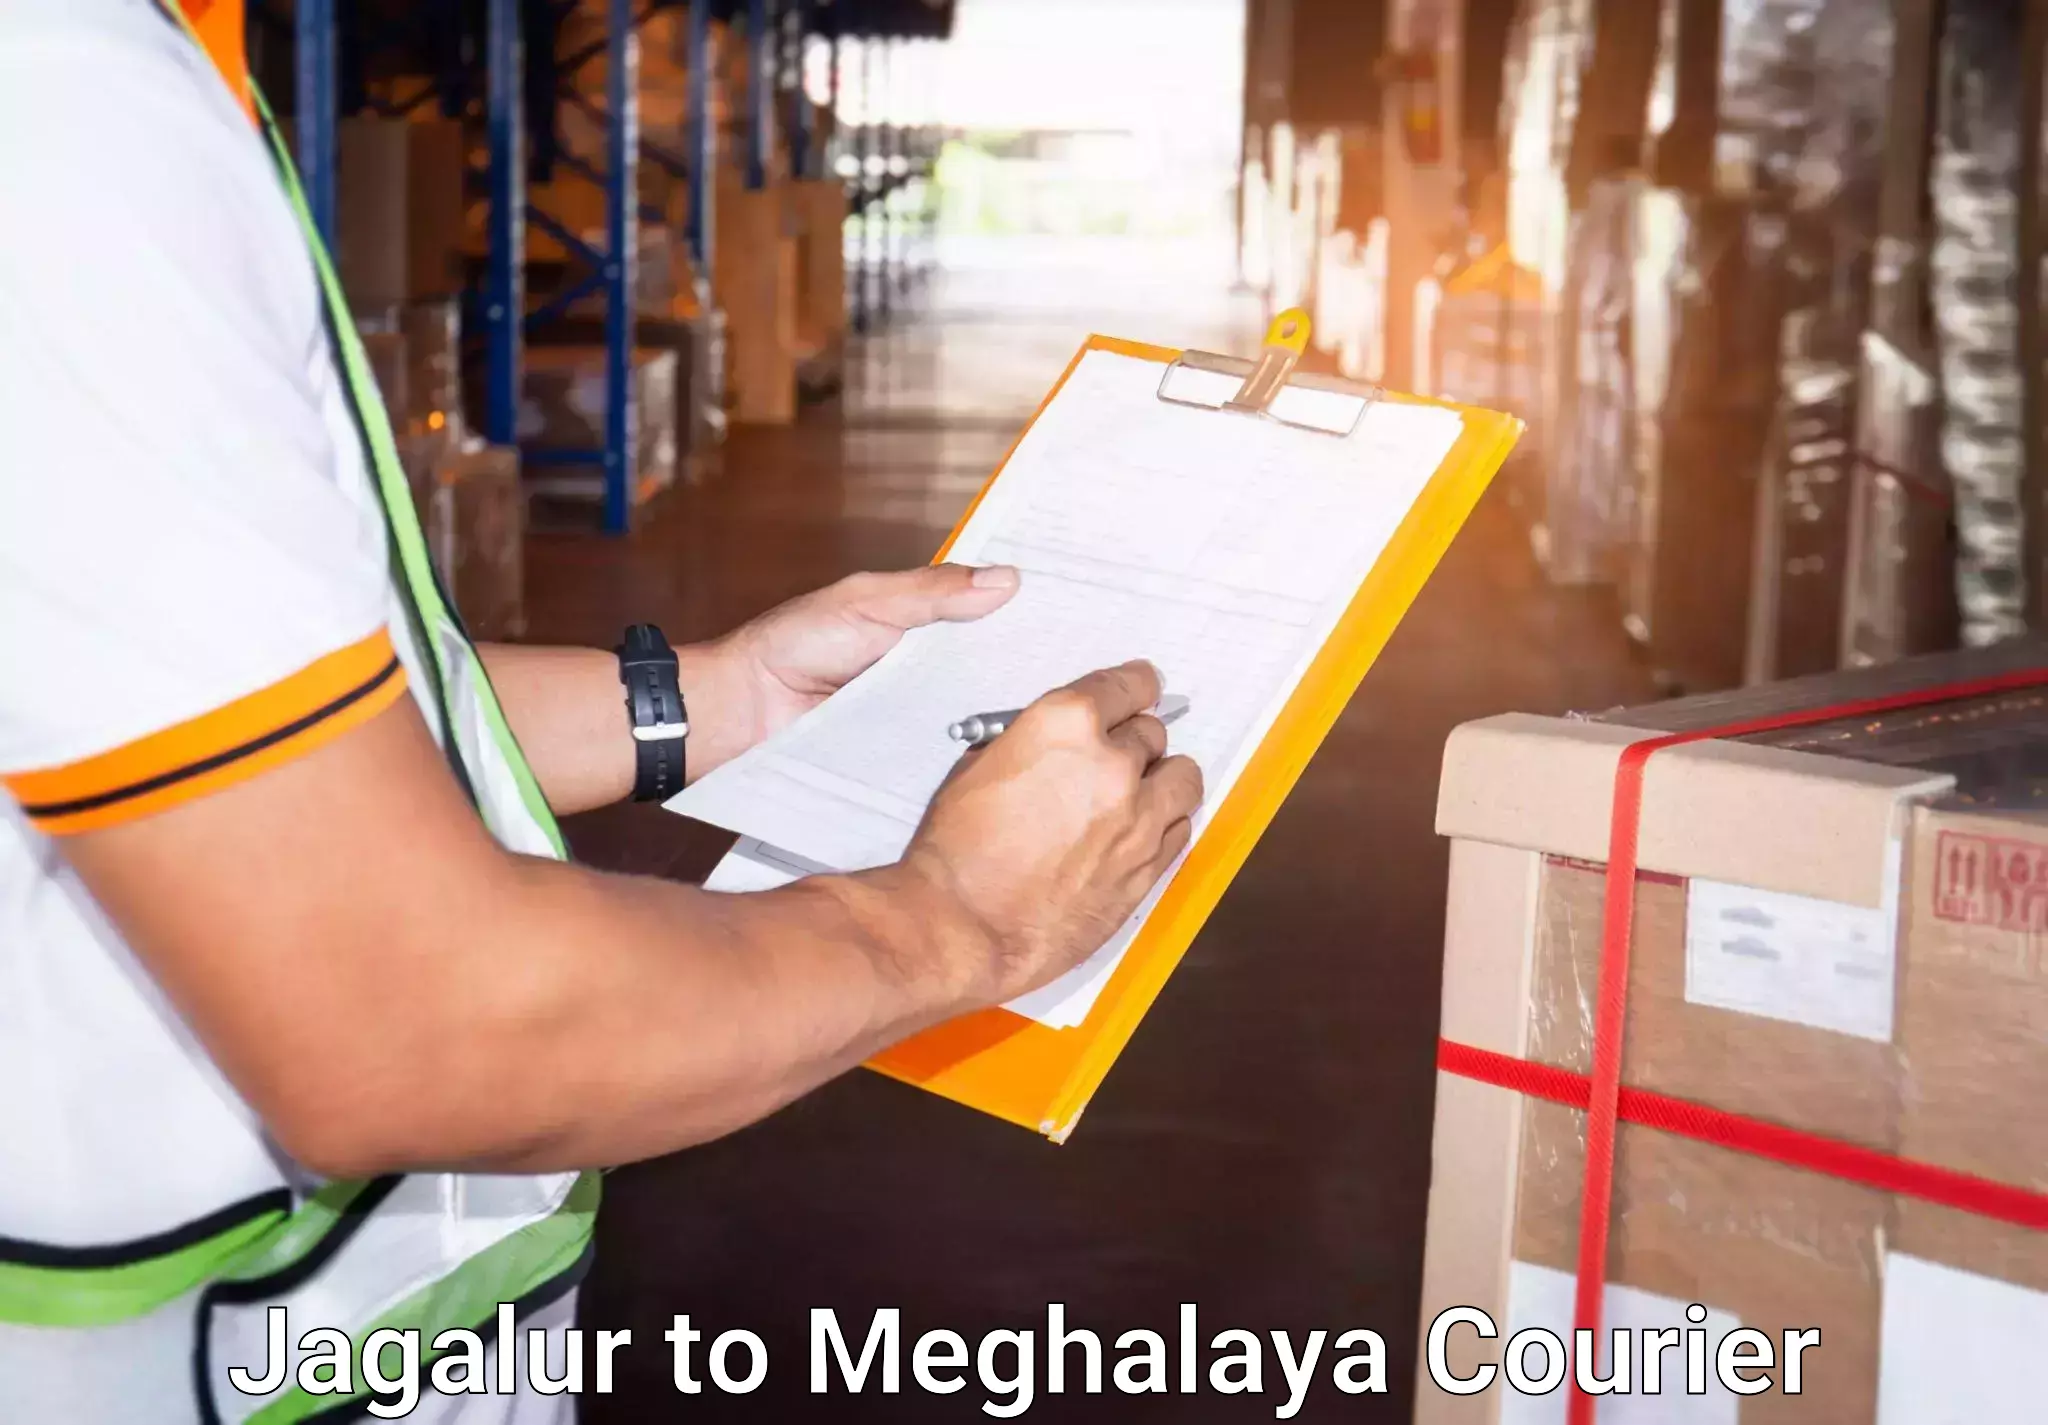 Personal effects shipping Jagalur to Meghalaya